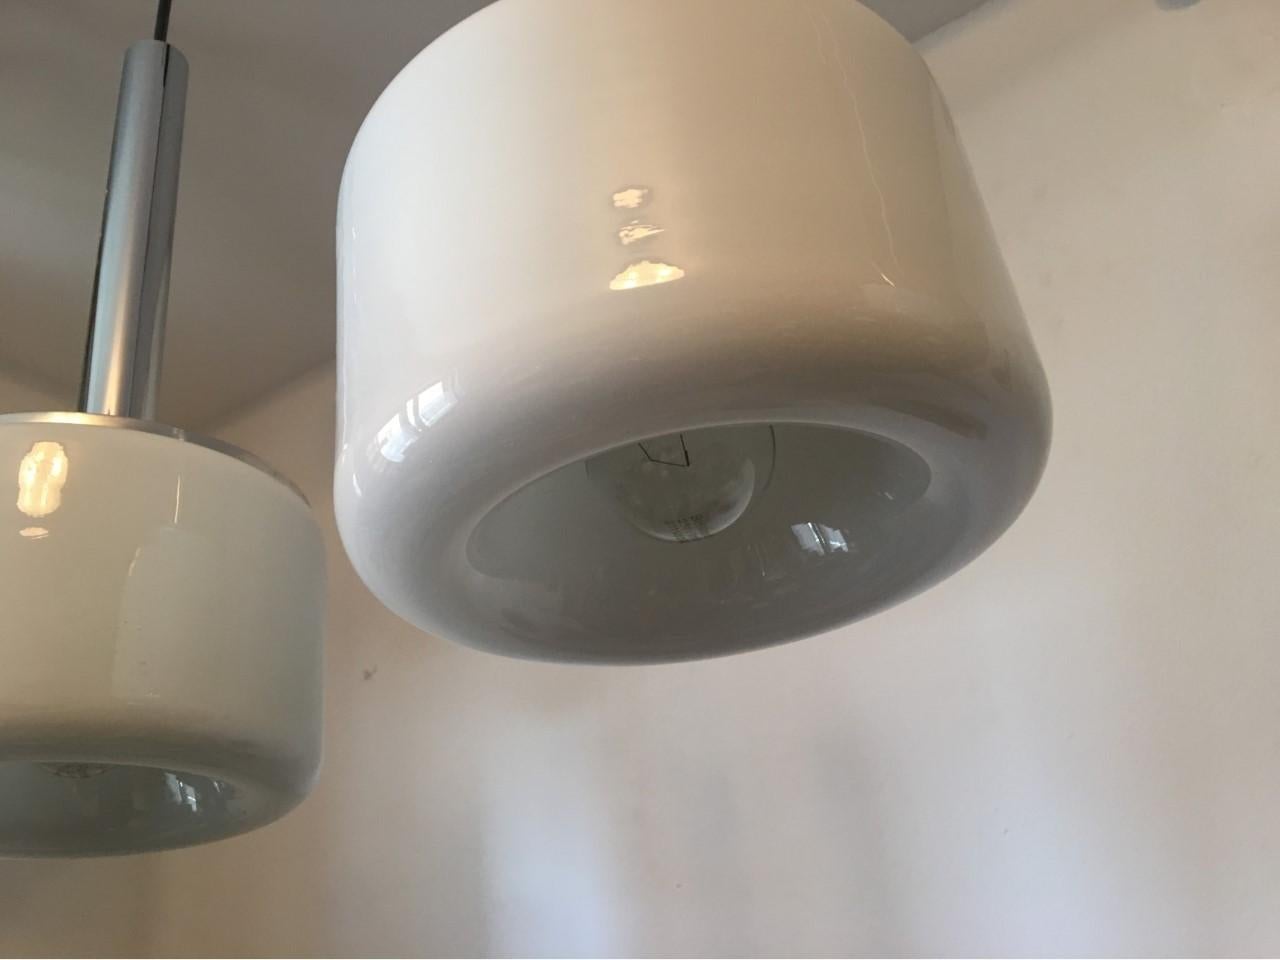 A pair of nice Doria Leuchten of Germany milk glass pendants with chrome holders and black cables. From the 1970s. In good working condition. Each requires E 26 / 27 Edison bulbs up to 100 watts each. Equipped with original 20th century wiring.